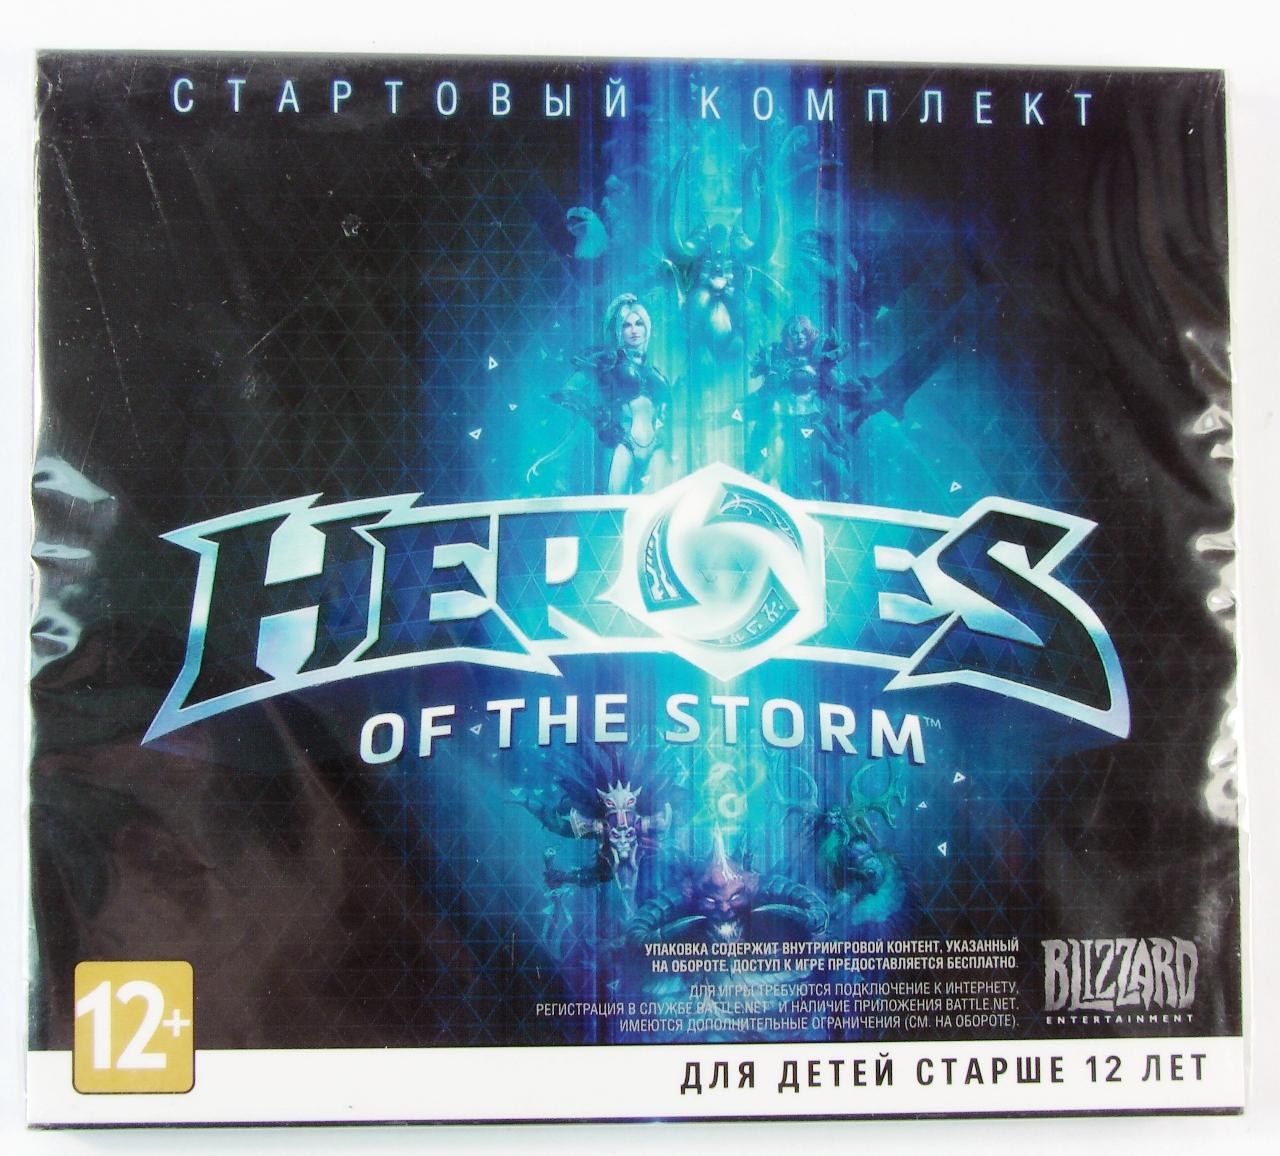  - Heroes of the Storm (PC),  "Blizzard", DVD